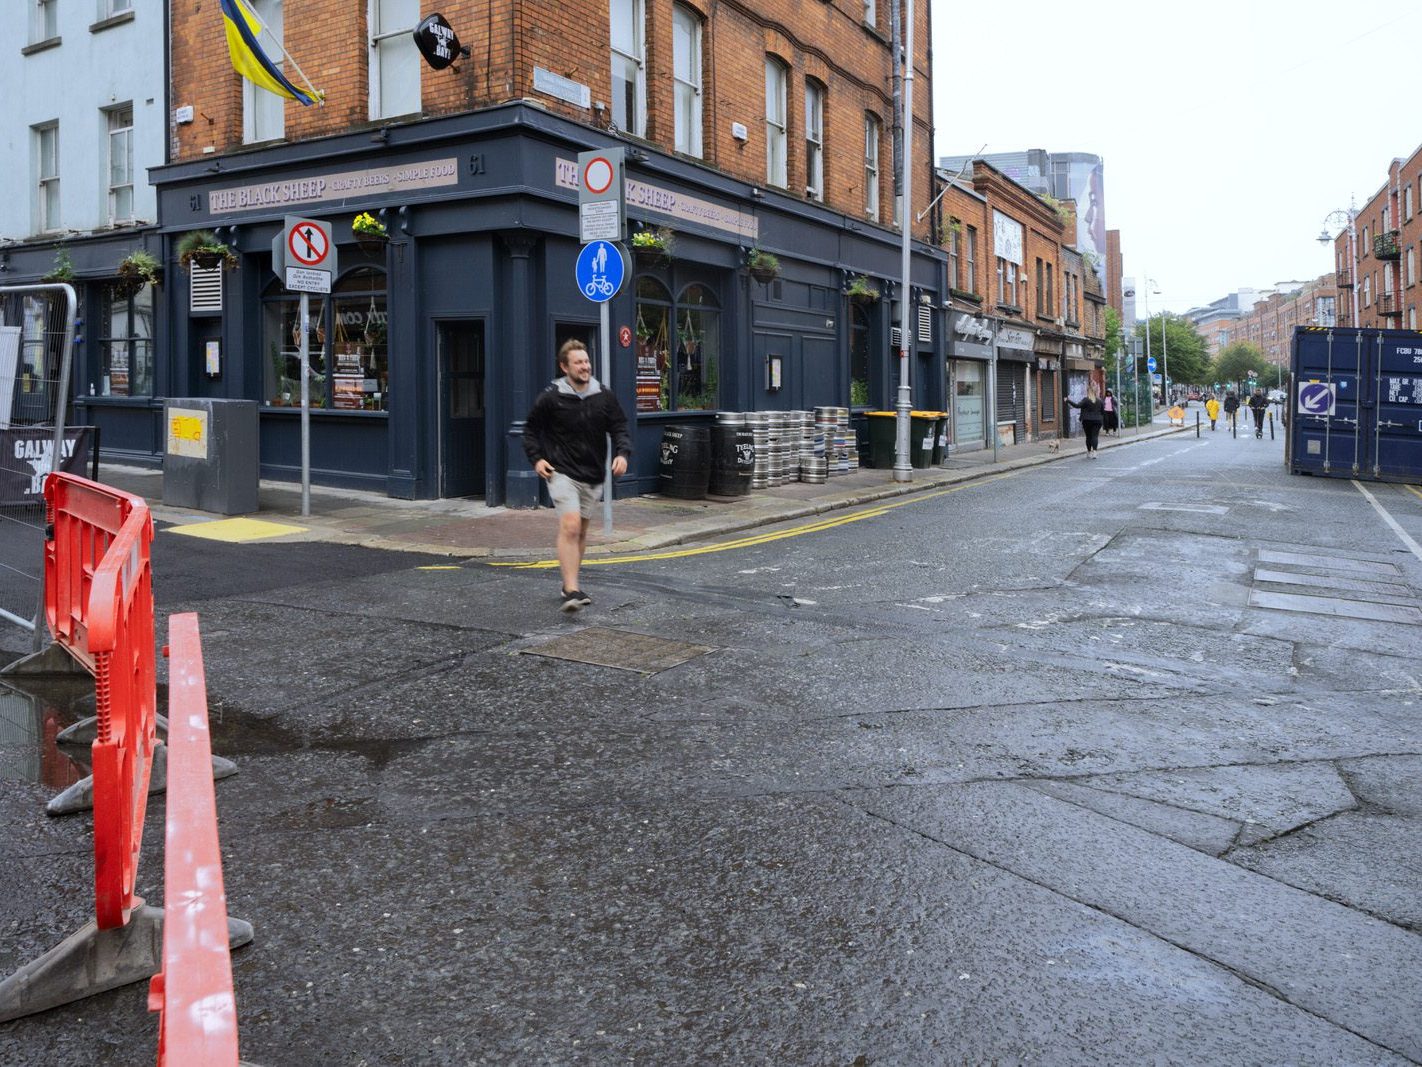 CAPEL STREET ON A DULL WET DAY [INTERIM CAPEL STREET IMPROVEMENT WORKS ARE NOW ONGOING] 013